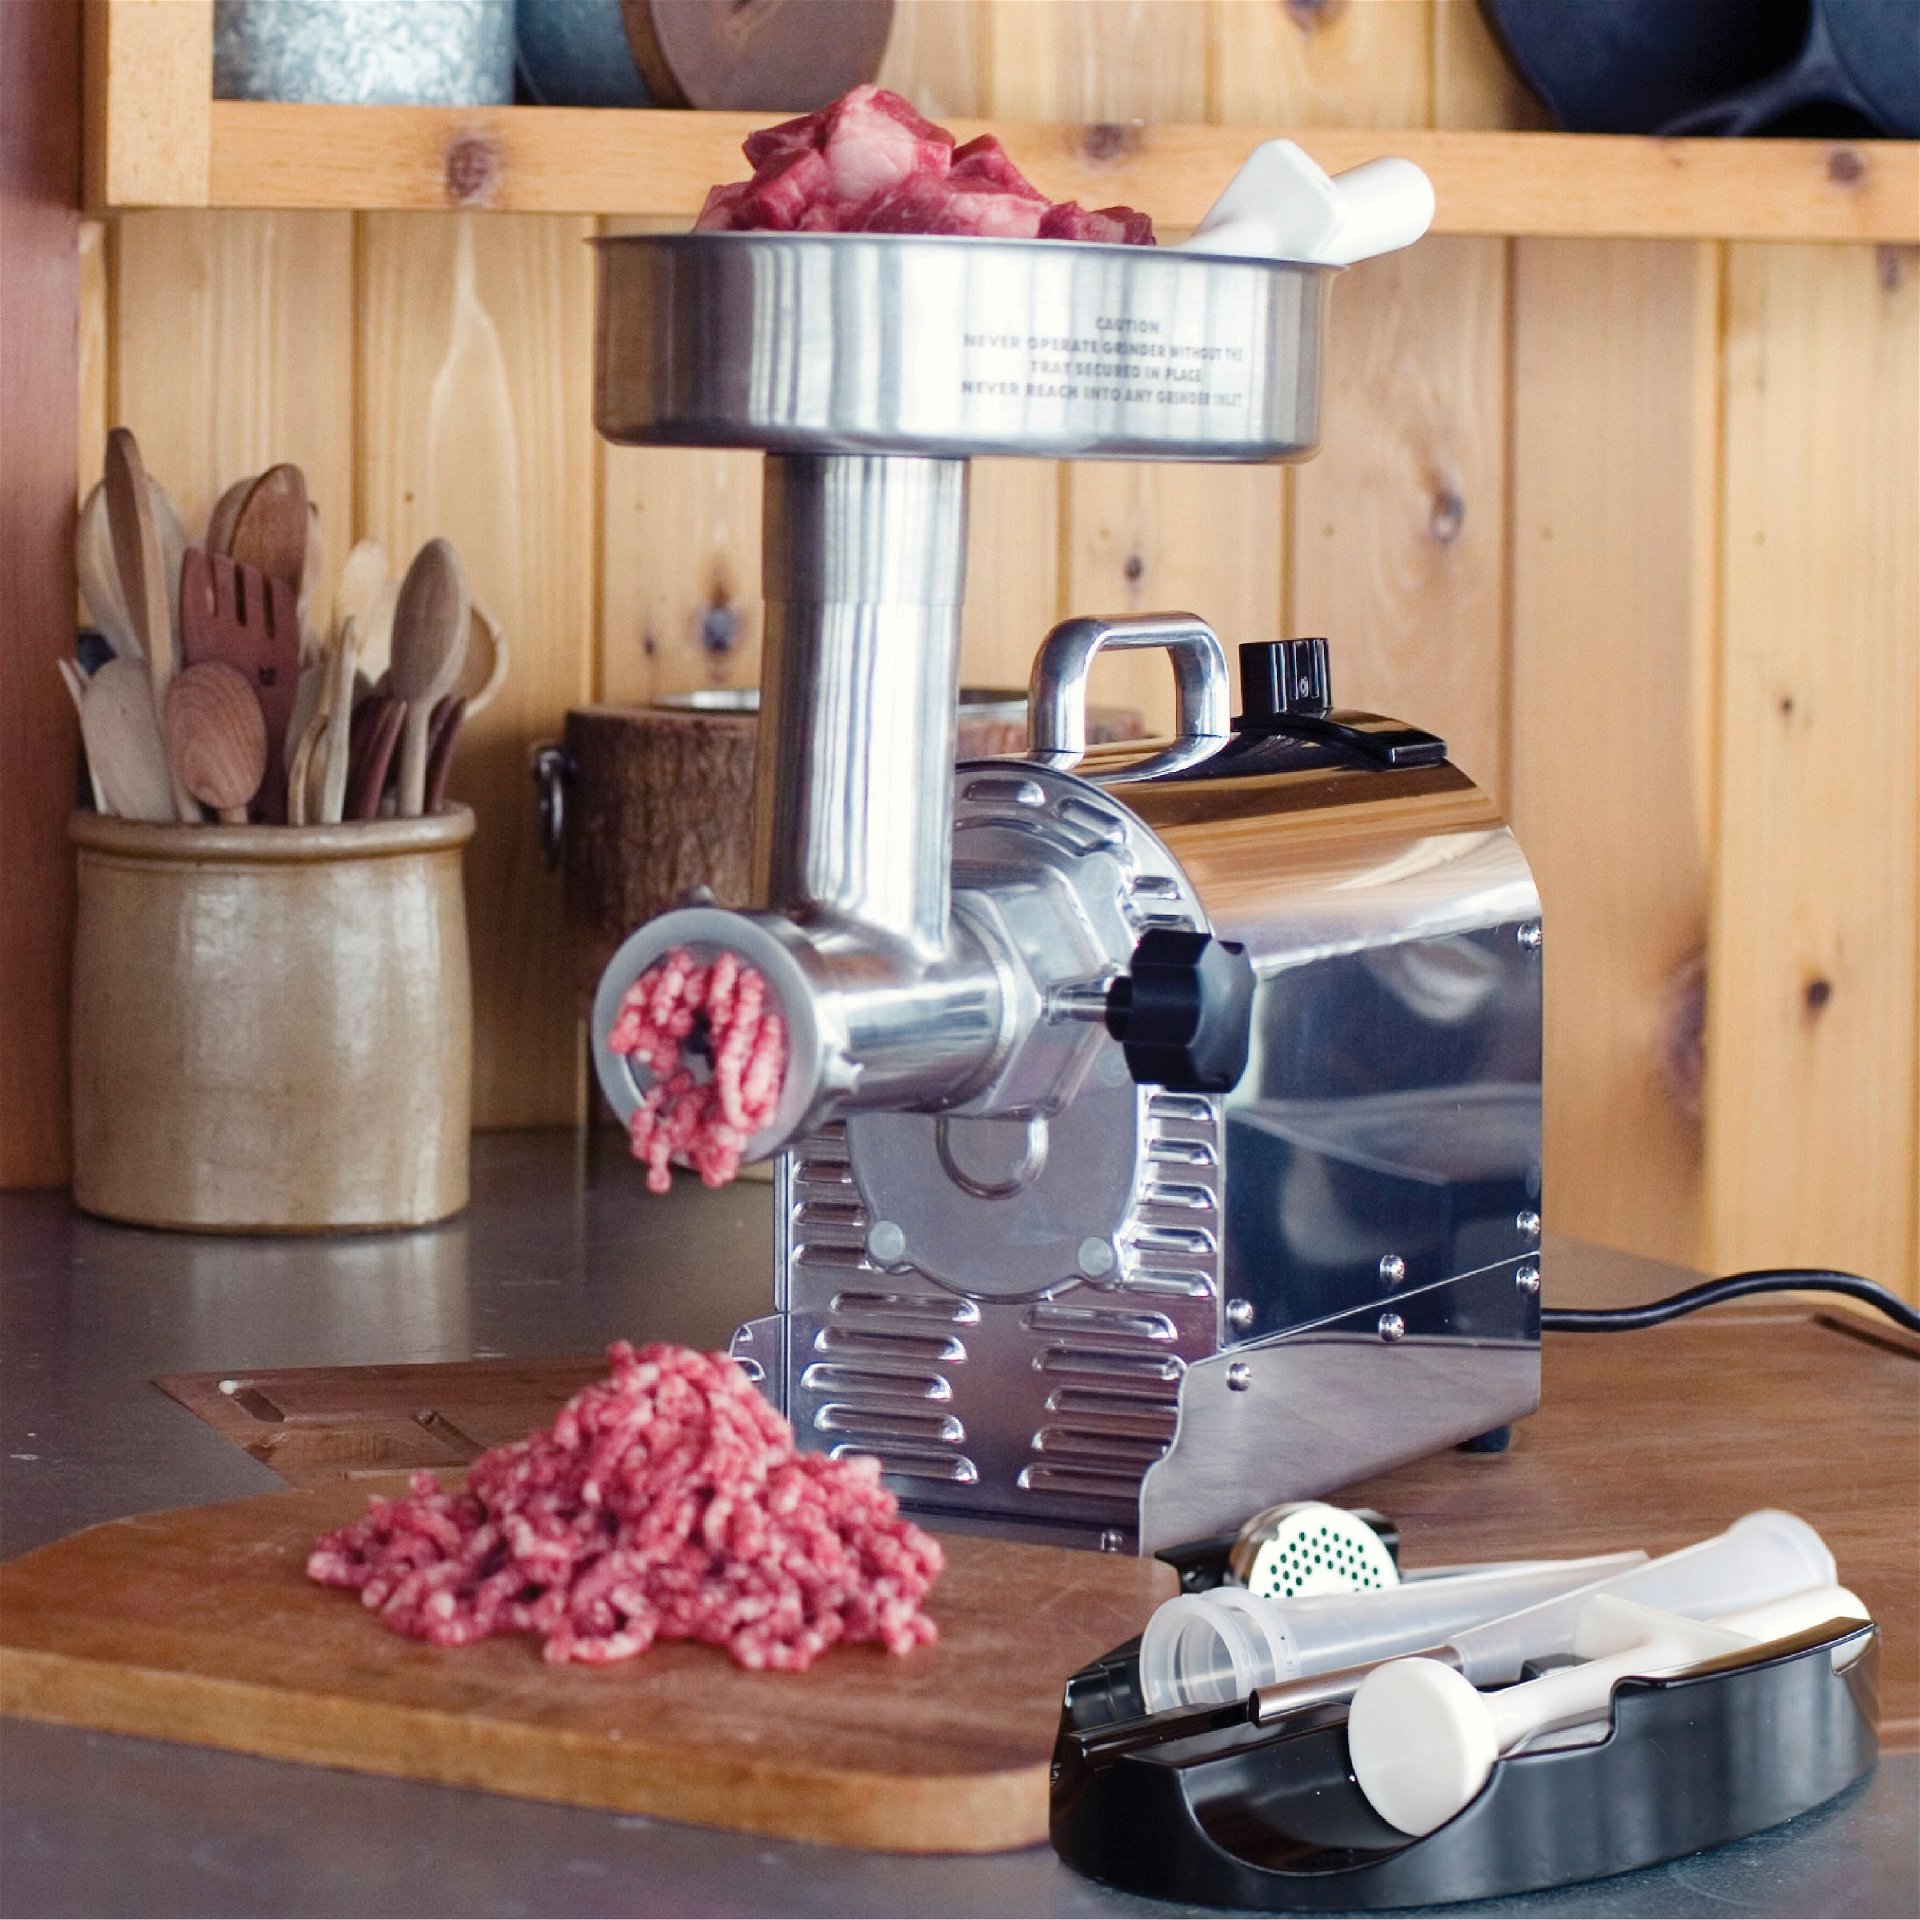 Manual Meat Grinder, Heavy Duty Meat Mincer Sausage Stuffer, 3-in-1 Hand  Grinder with Stainless Steel Blades for Meat, Sausage, Cookies, Easy To  Clean 